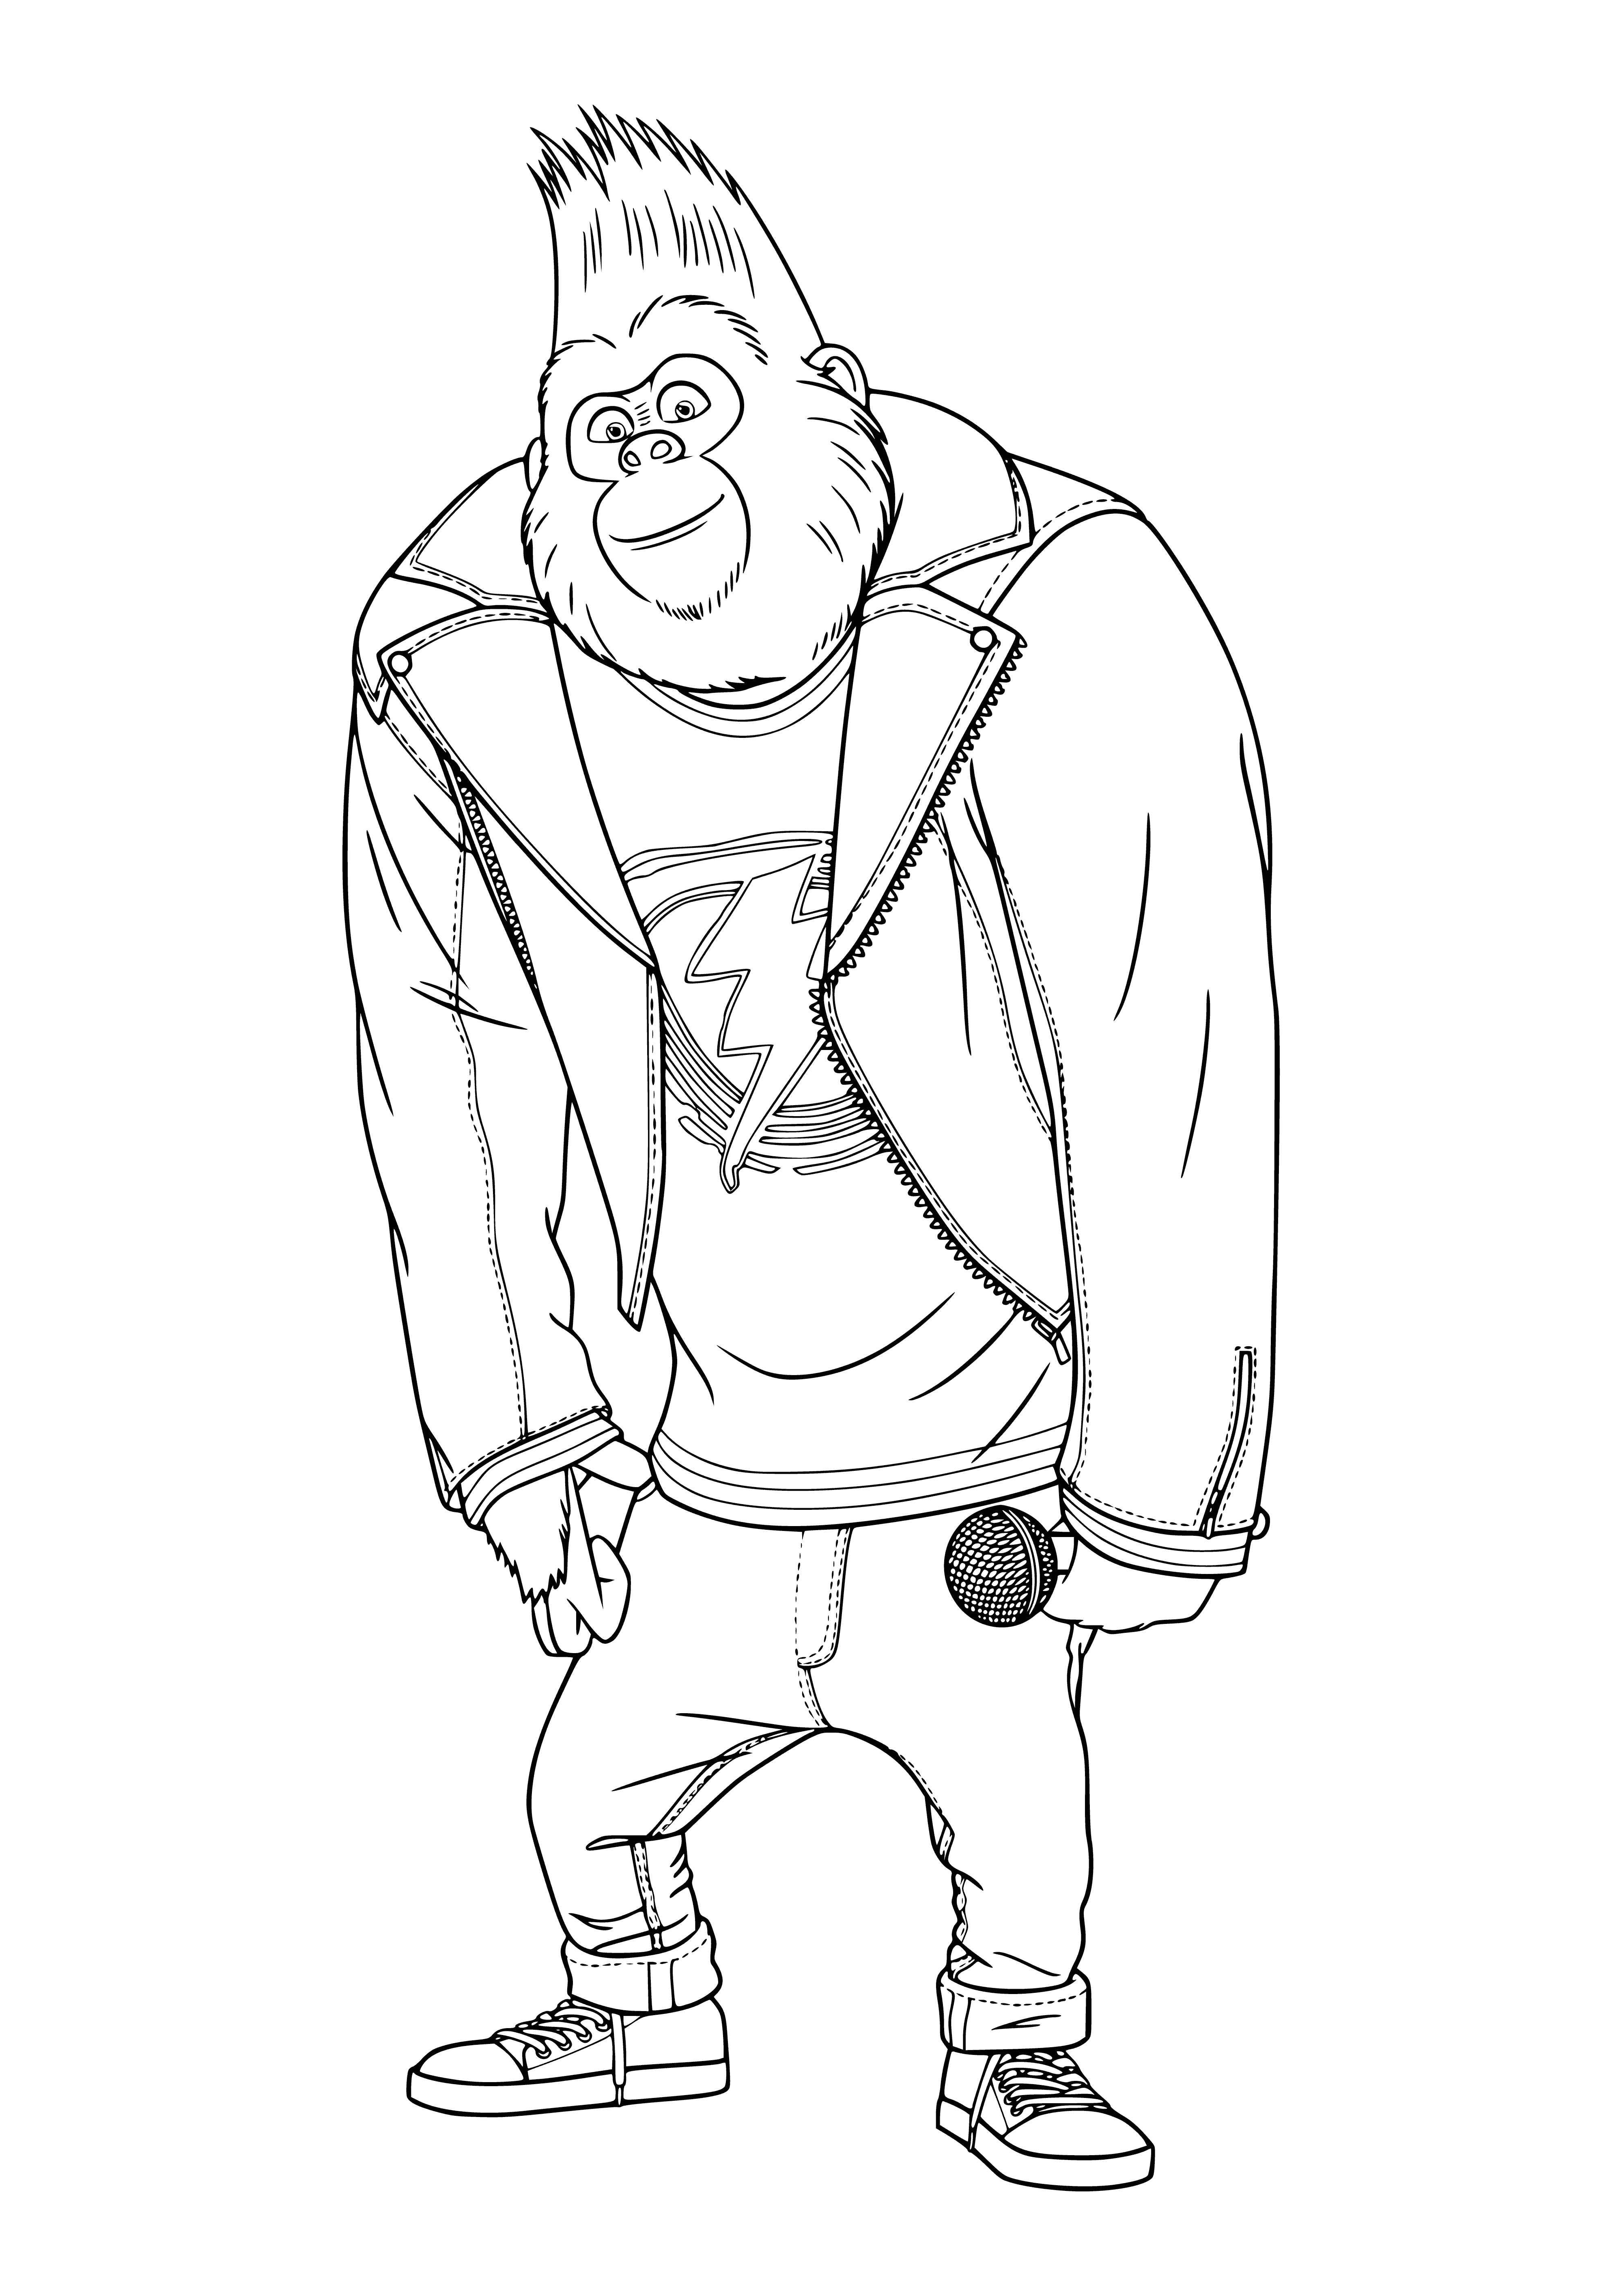 coloring page: A gorilla stands in front of a music stand with a microphone and guitar, dressed in a blue shirt. #music